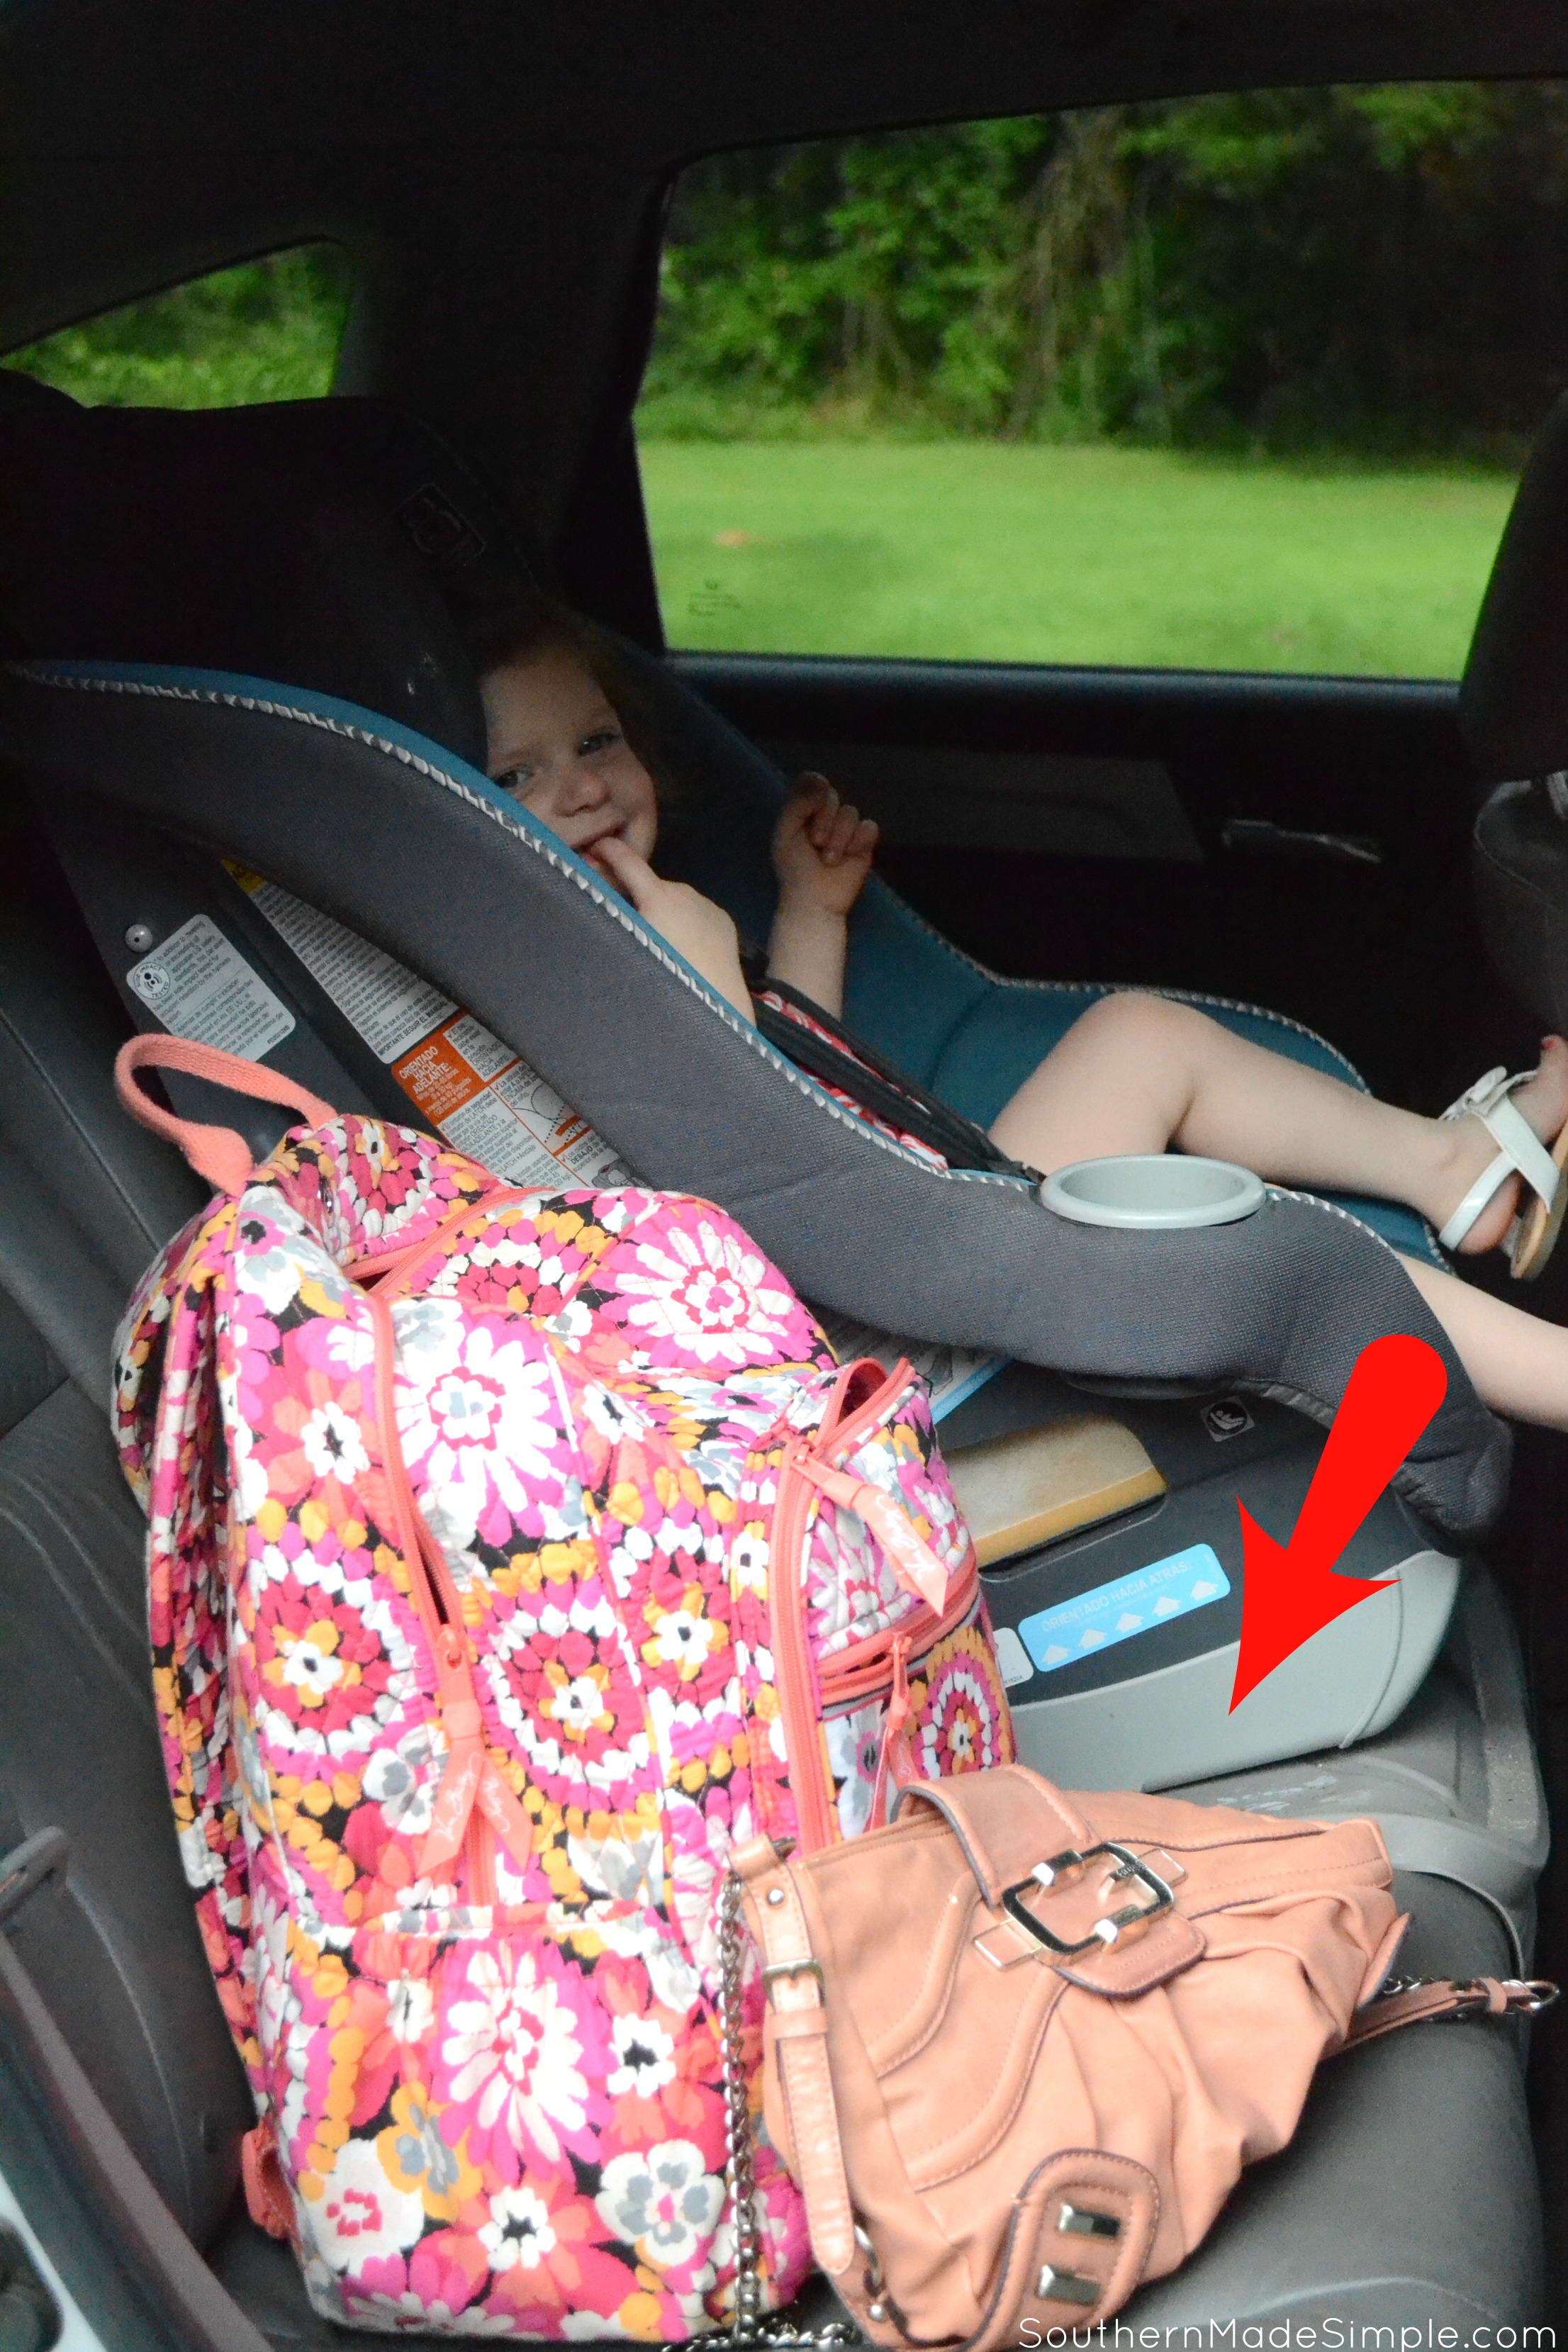 Baby on Board? Here's what you need to know about heatstroke prevention #CheckforBaby #ad #IC